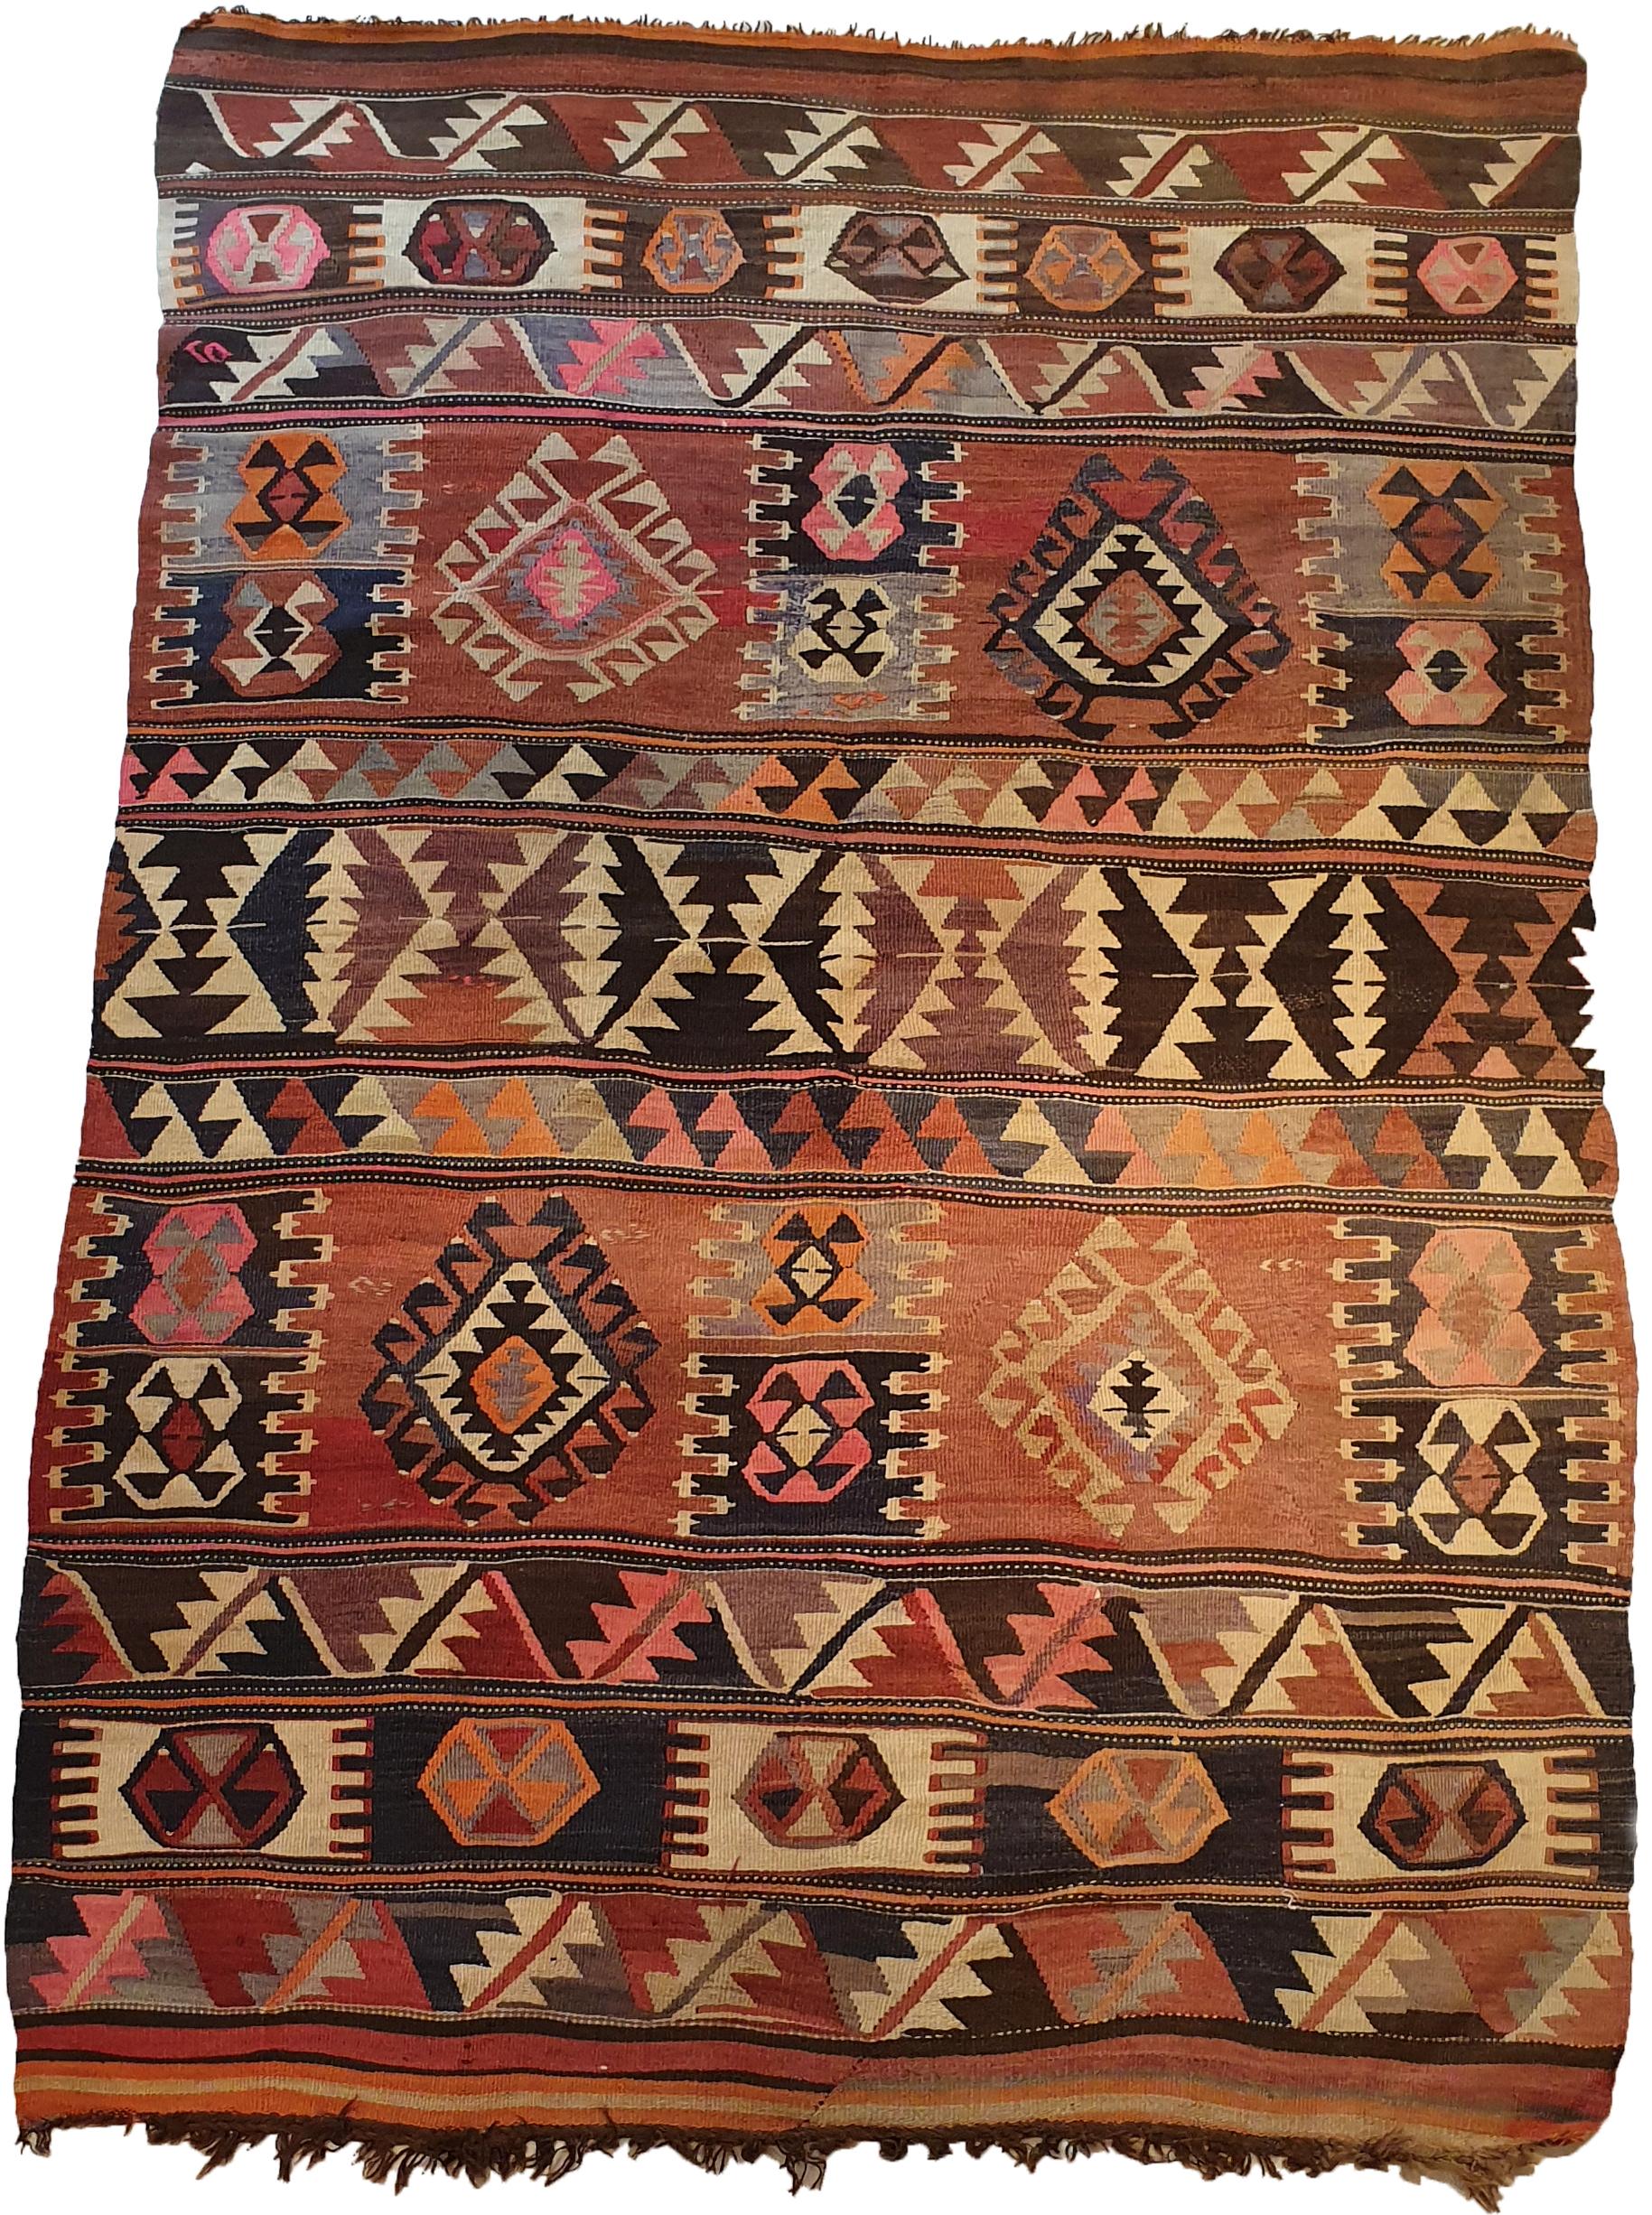 842 - Very beautiful antique Kilim from the Shahsavan with beautiful natural colors with blue green, orange and red and geometric tribal design. A collector's item, entirely handwoven with wool on a wool basis.